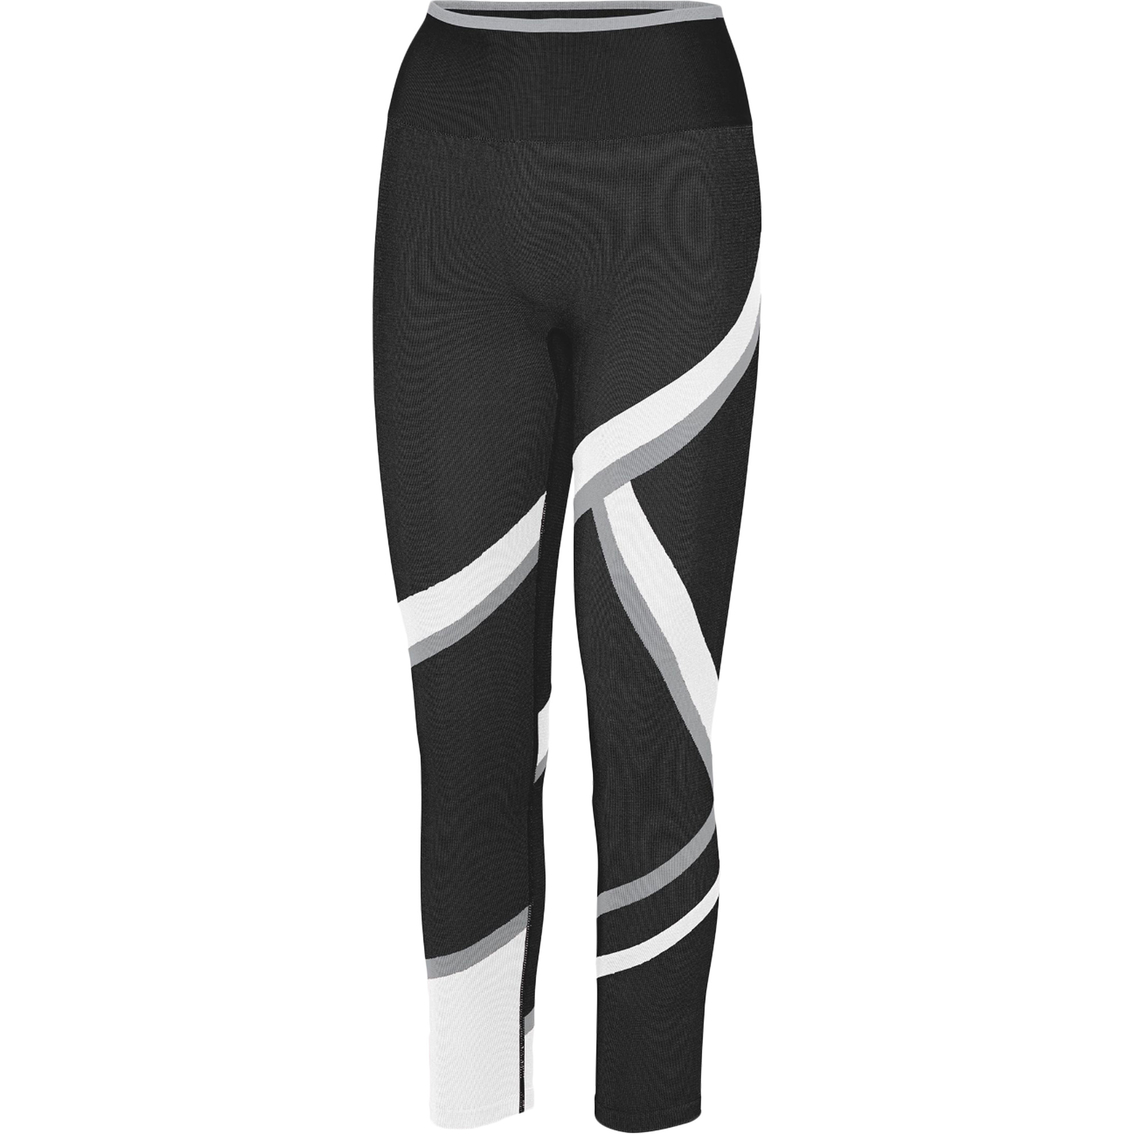 Champion Infinity Asymmetrical Tights, Leggings, Clothing & Accessories